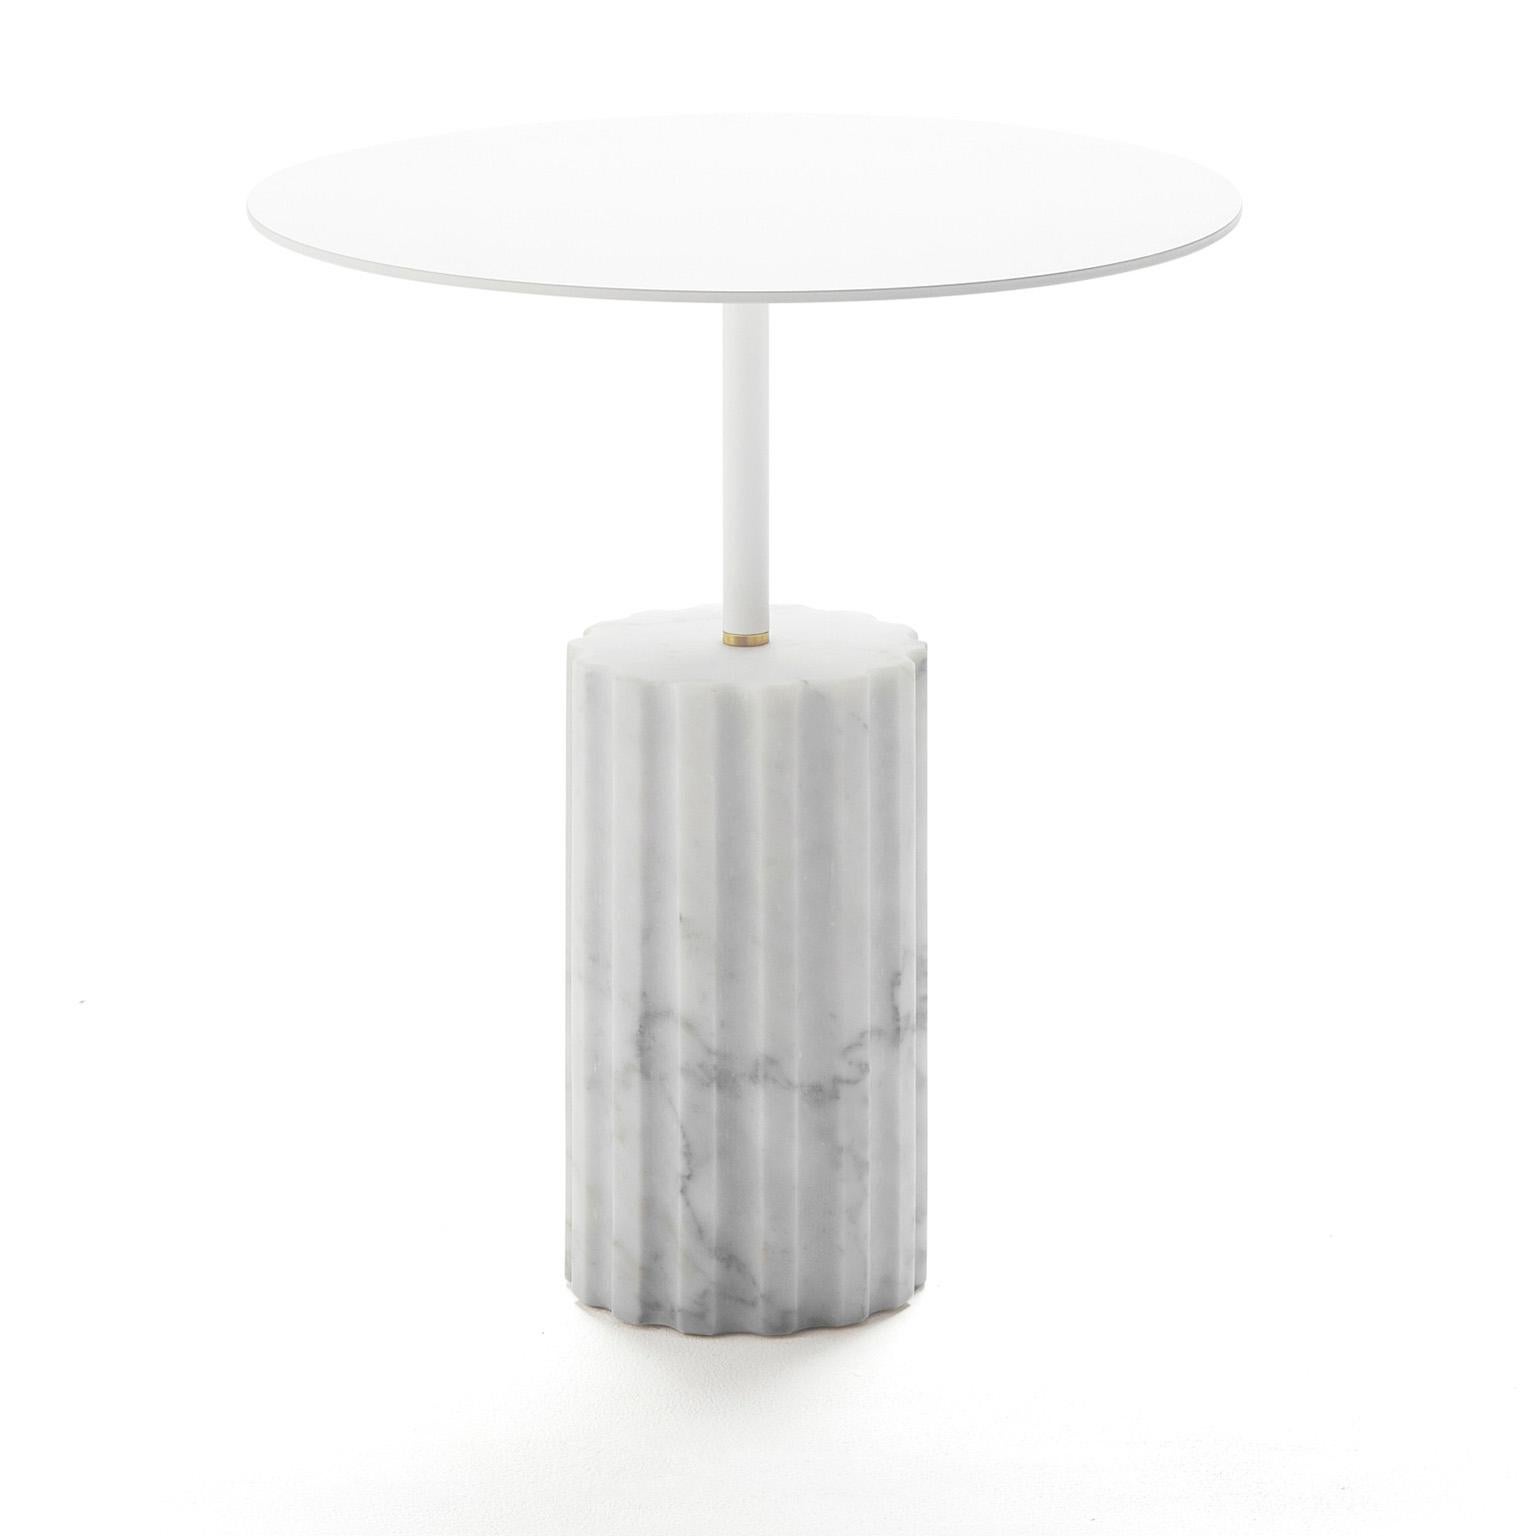 A minimalist side table, a variation of the column side table but wider at the marble base and with a larger top, a better choice for places with carpeting, carpets or uneven surfaces but with all the style and look of the regular column side table.